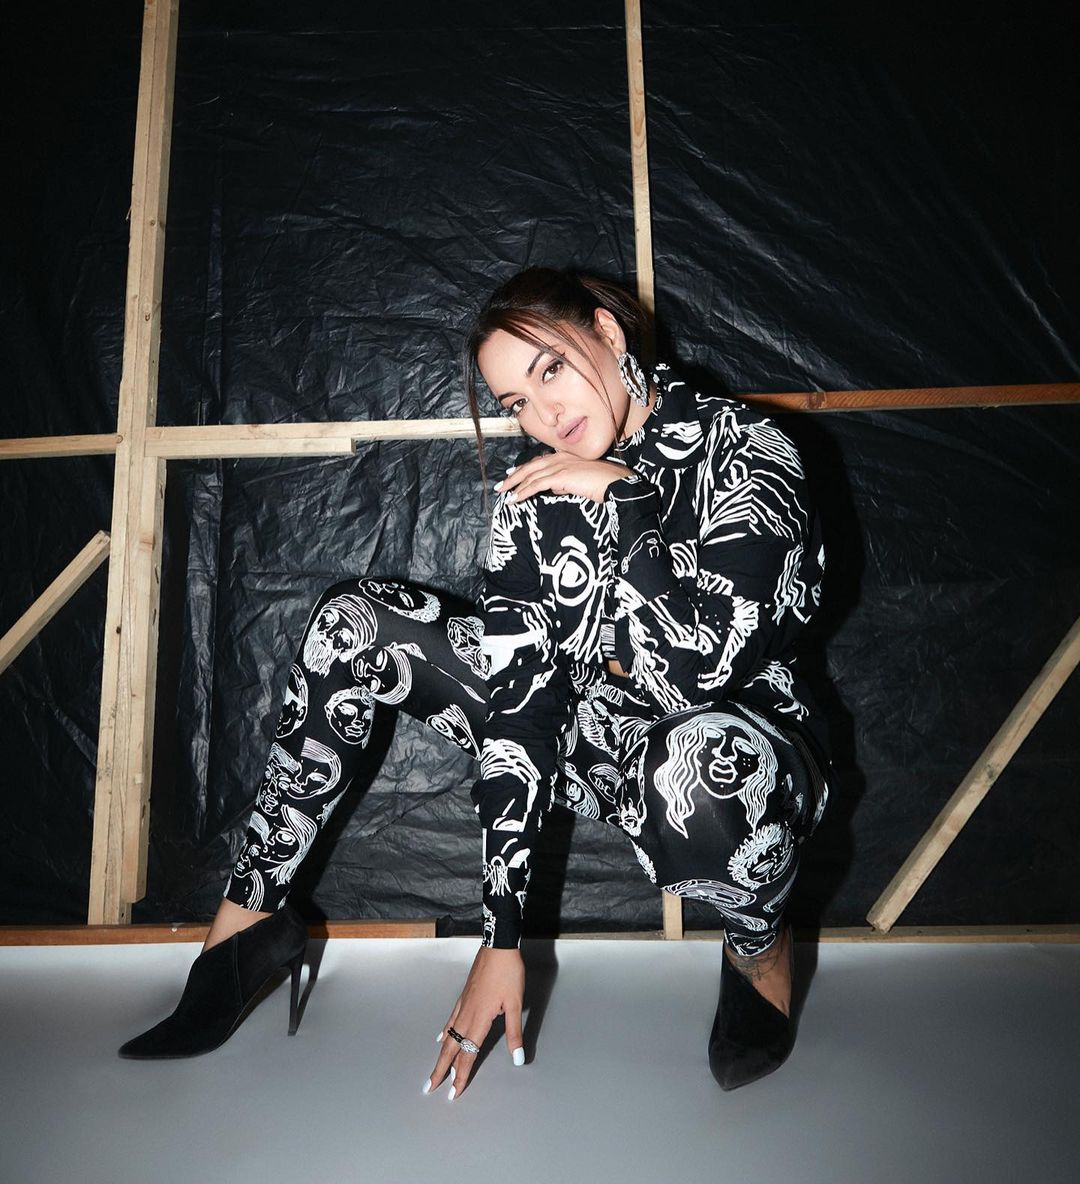 Celebrity Style Alert: Sonakshi Sinha Is Fearless With Her Artistic Ensemble: Beautiful South Asian inspired stencilling gives her look an added edge. Photo Credit: www.instagram.com/aslisona